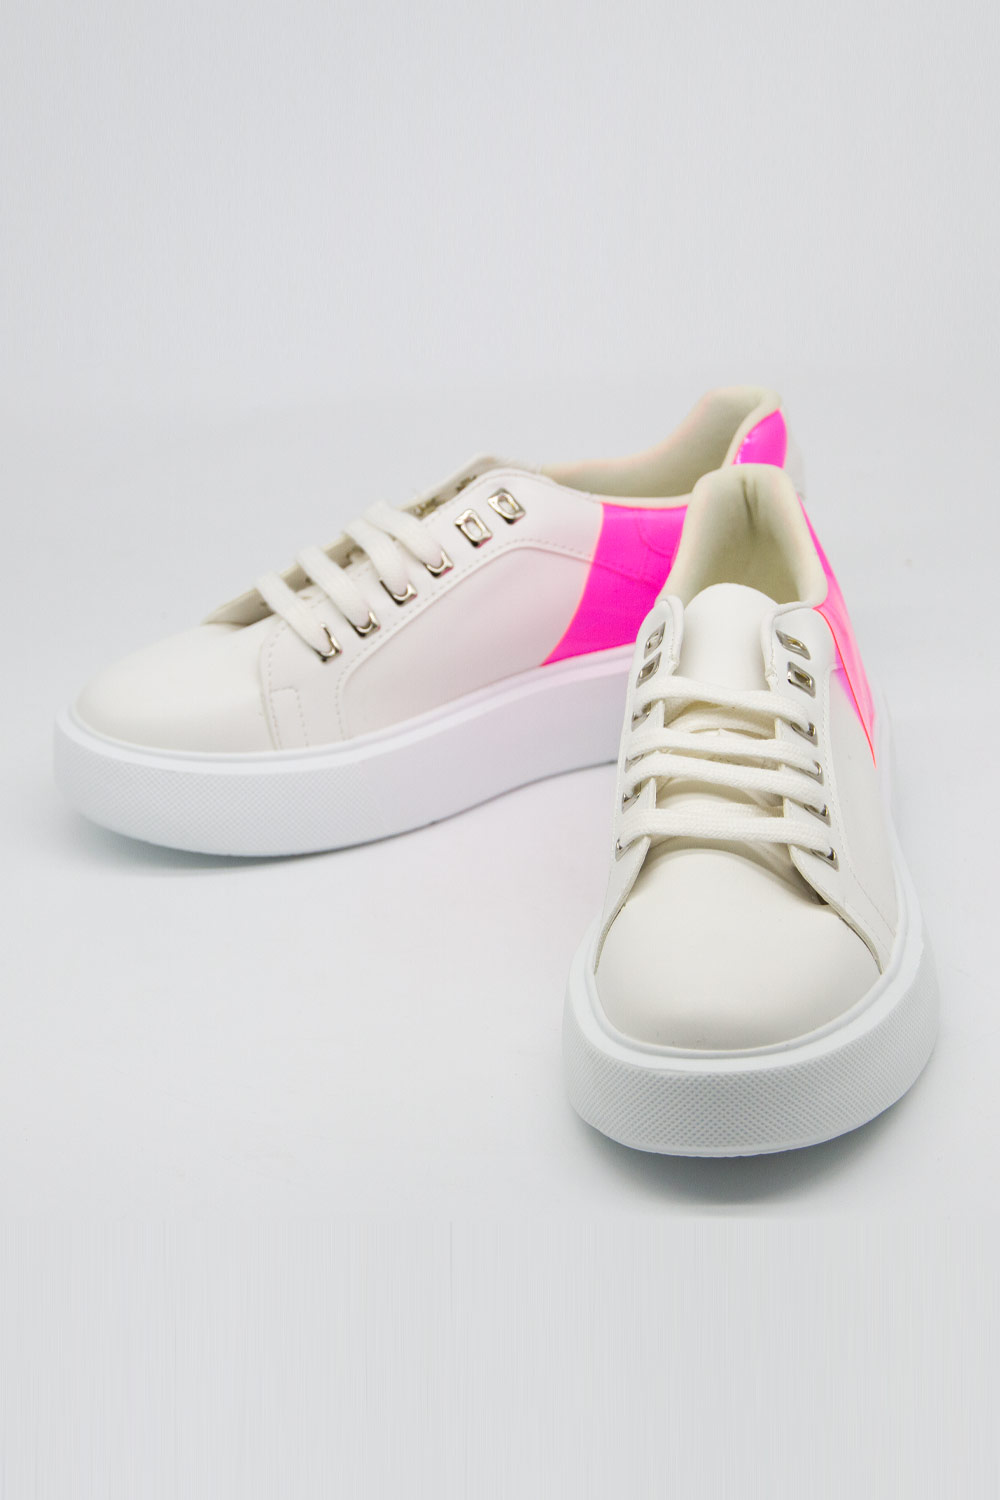 Neon Thick Sole Sneaker (Pink)